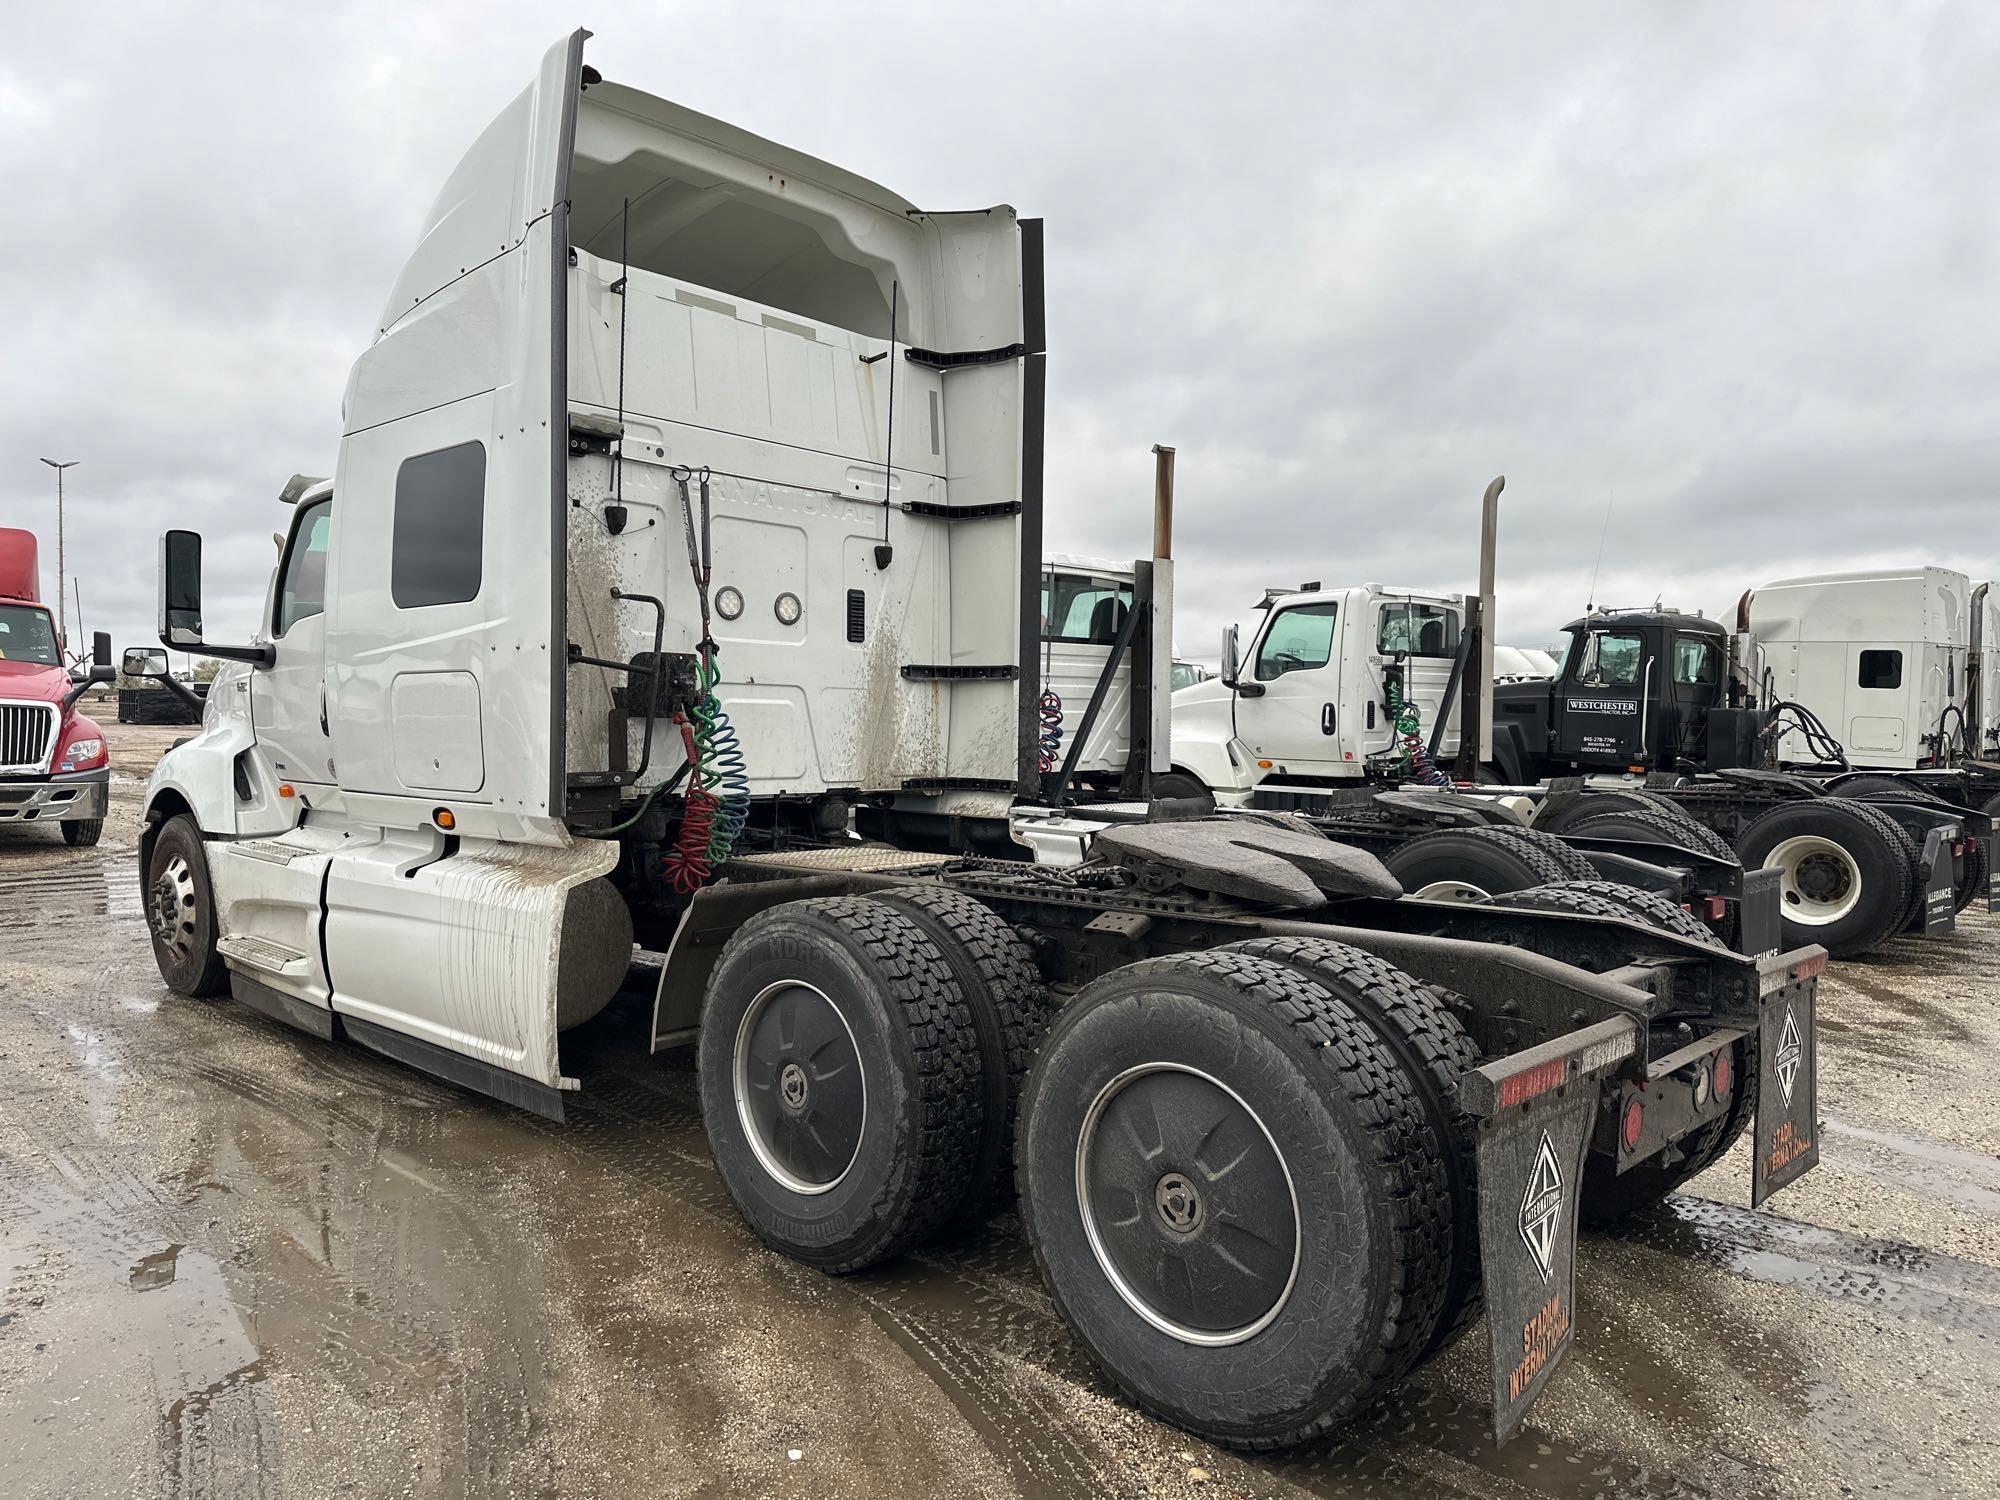 2018 INTERNATIONAL PROSTAR TRUCK TRACTOR VN:JN226952...powered by diesel engine, equipped with Eaton